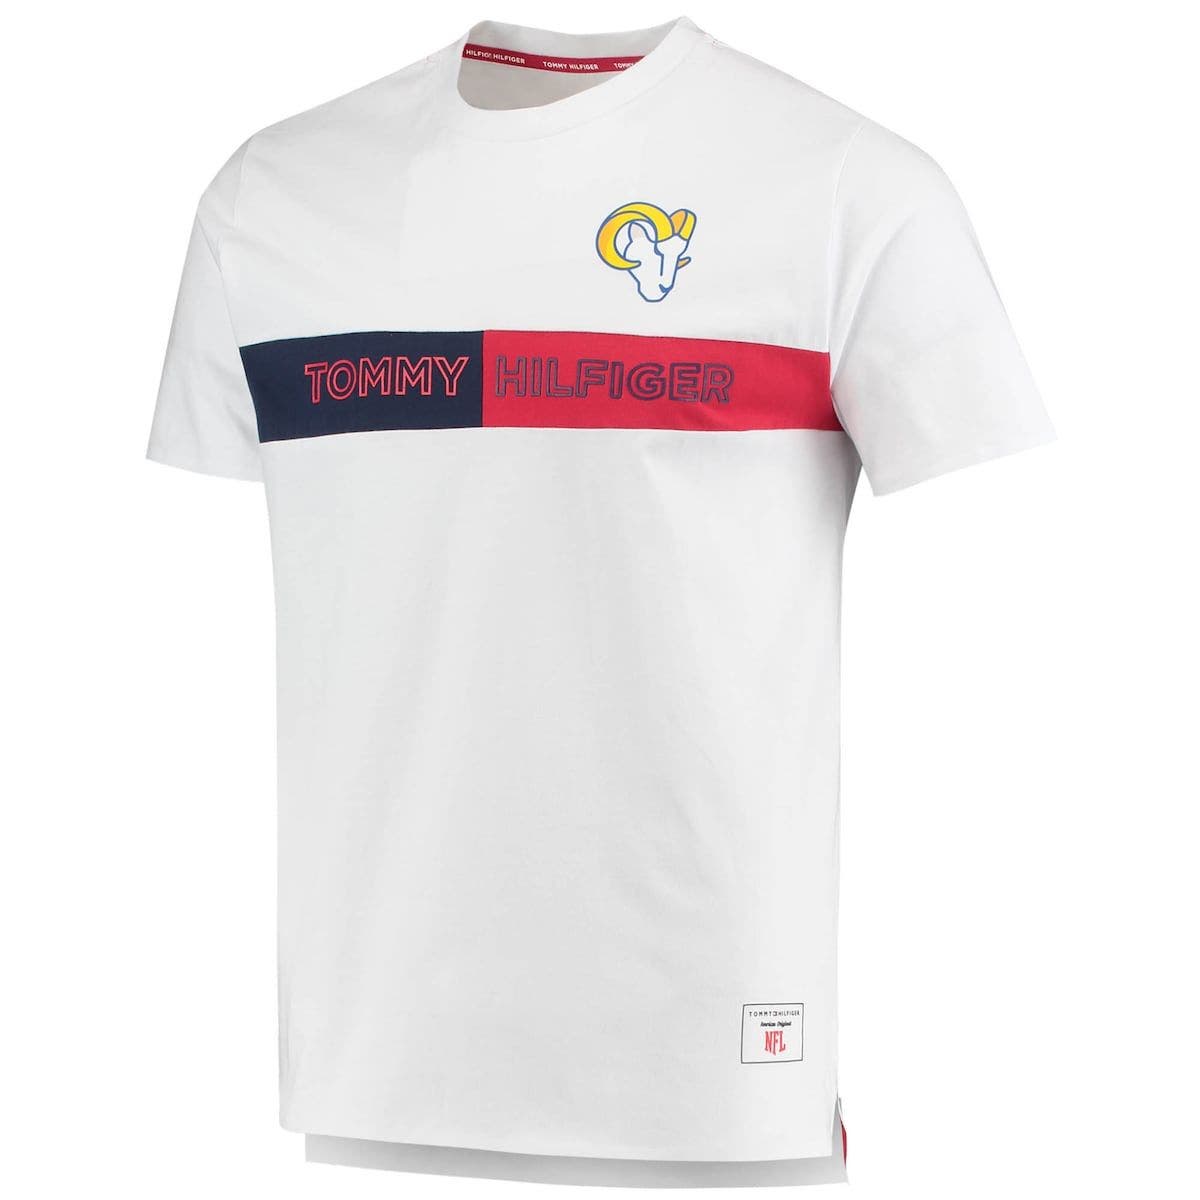 Tommy Hilfiger T-shirt Brand New 2019 in 3 colors FATHER'S DAY GIFT